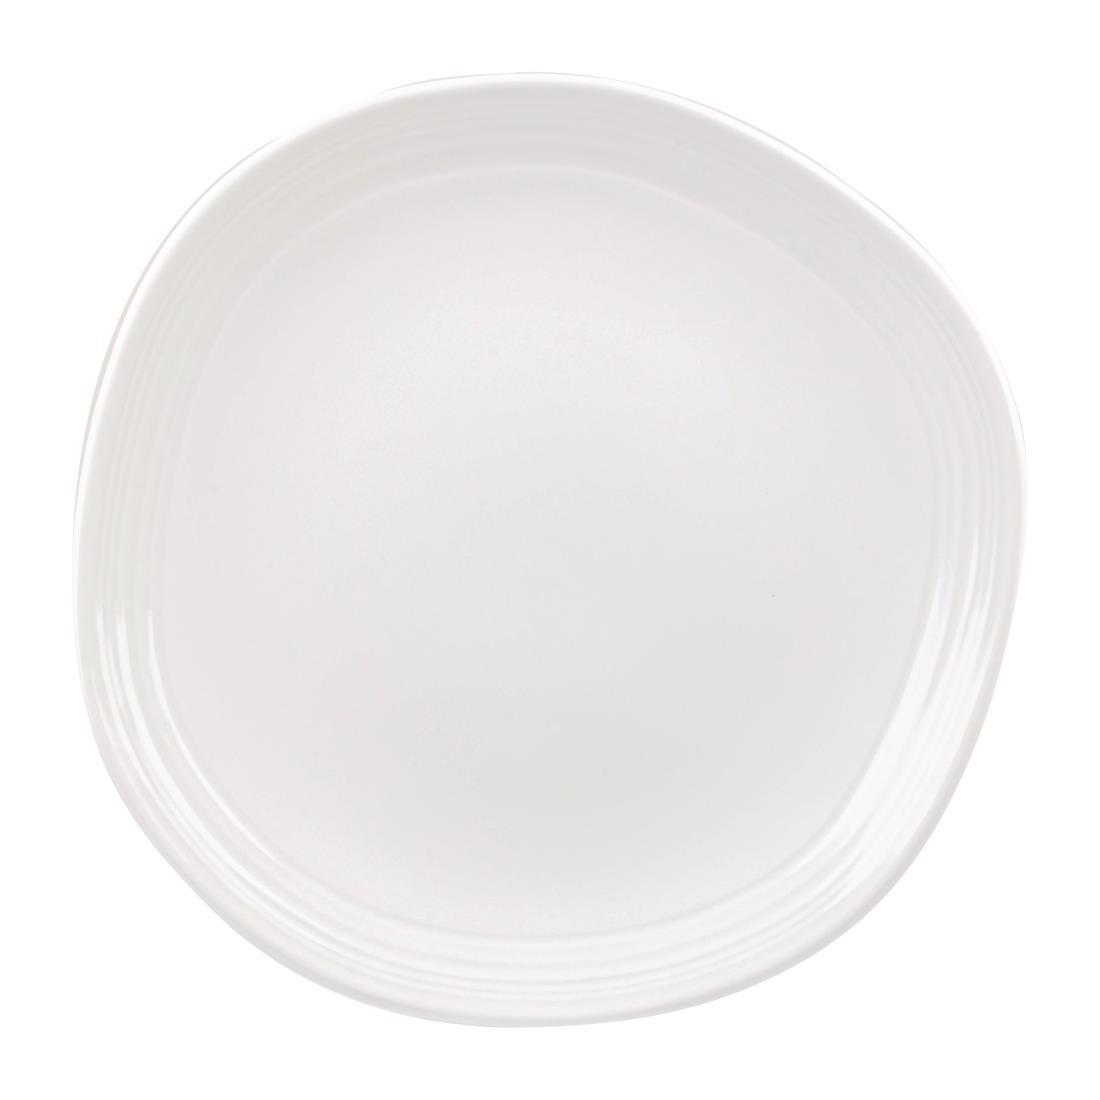 Churchill Discover Round Plates White 286mm (Pack of 12) - CS064  - 2